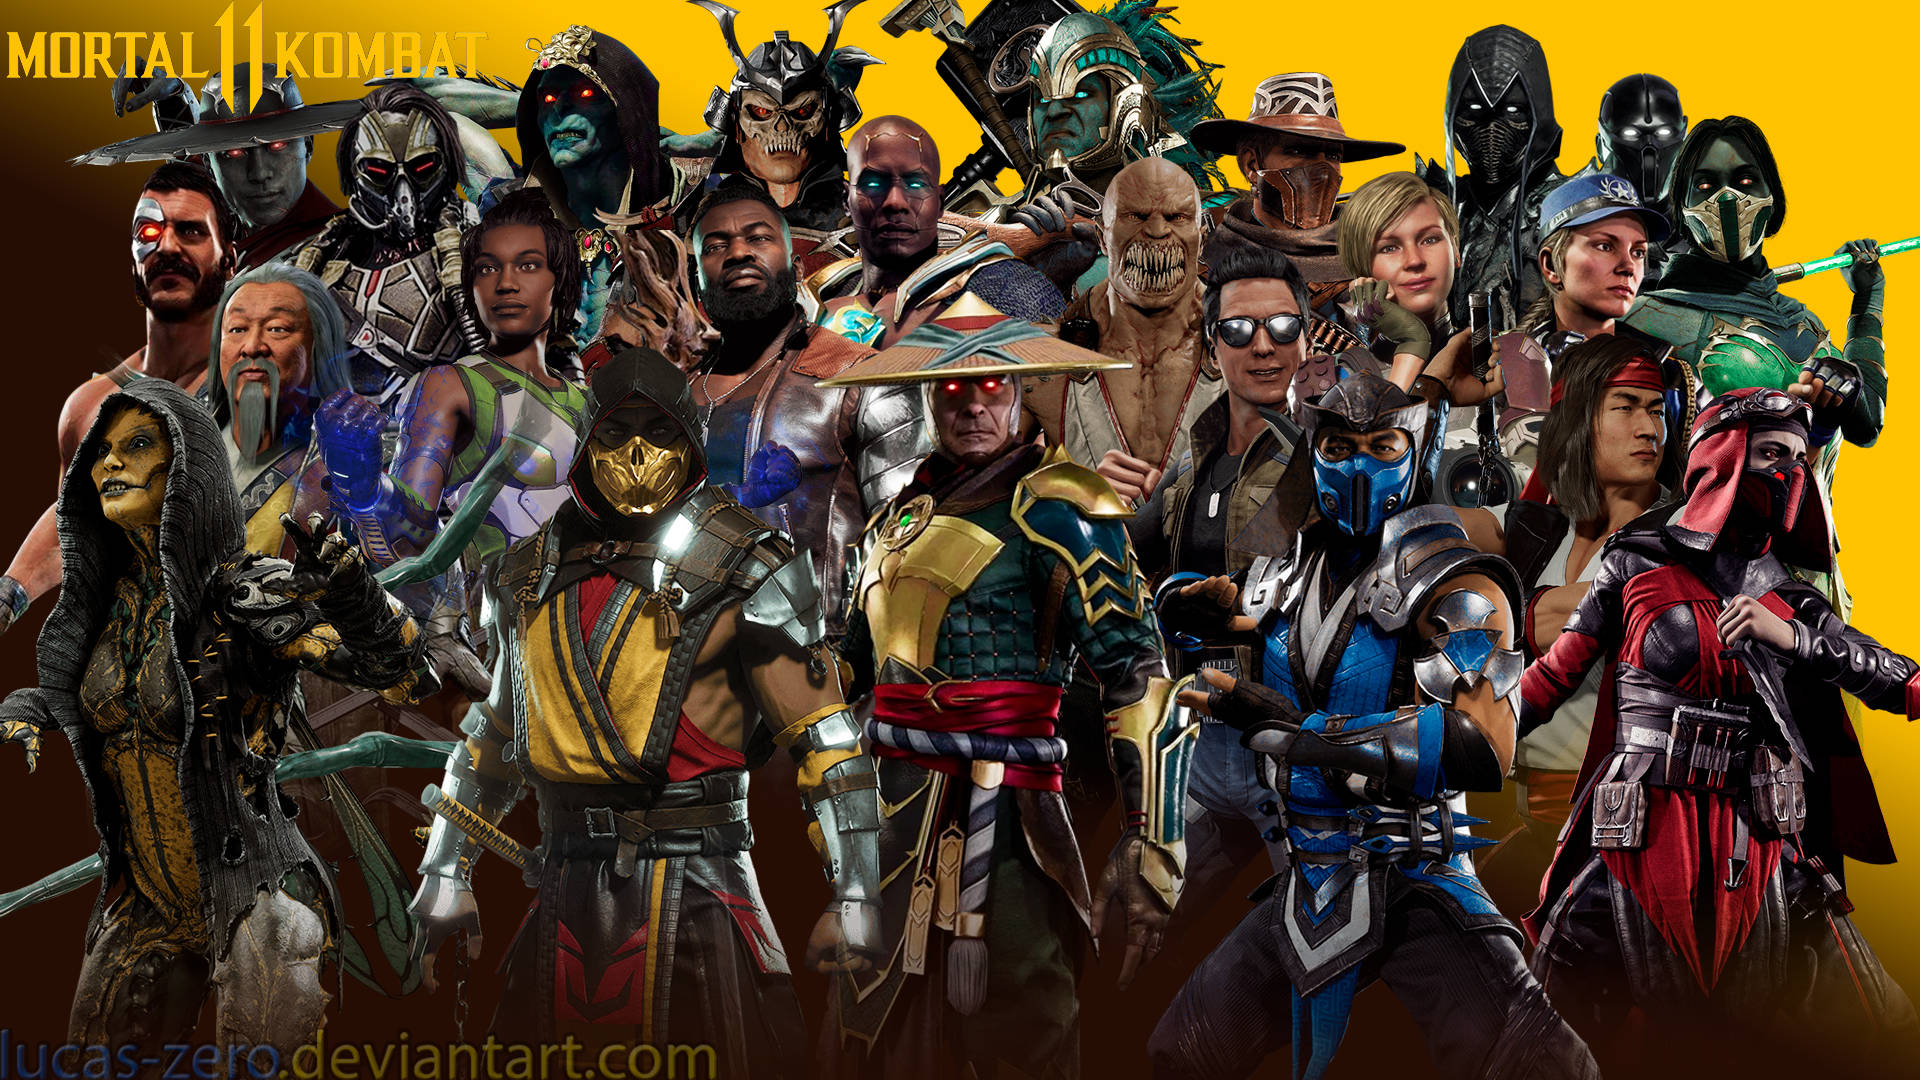 All The Fighters From Mortal Kombat 11 Ready For Battle Wallpaper